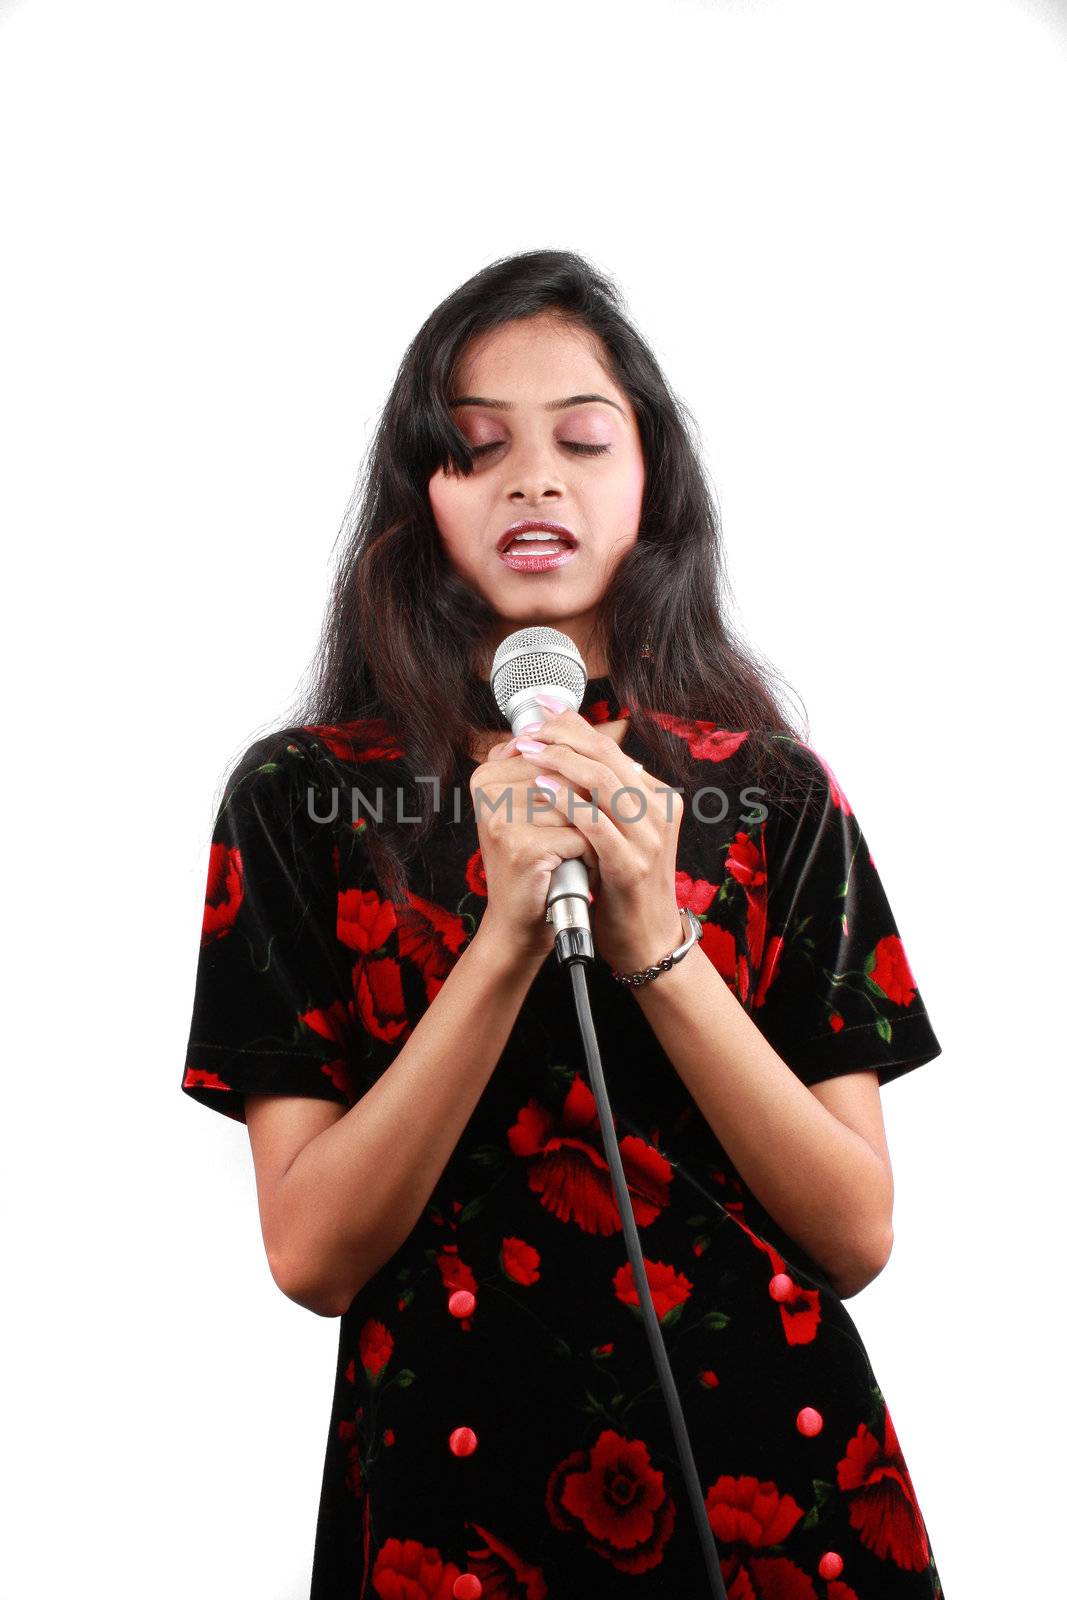 A devoted young Indian singer saying a prayer, on white studio background.